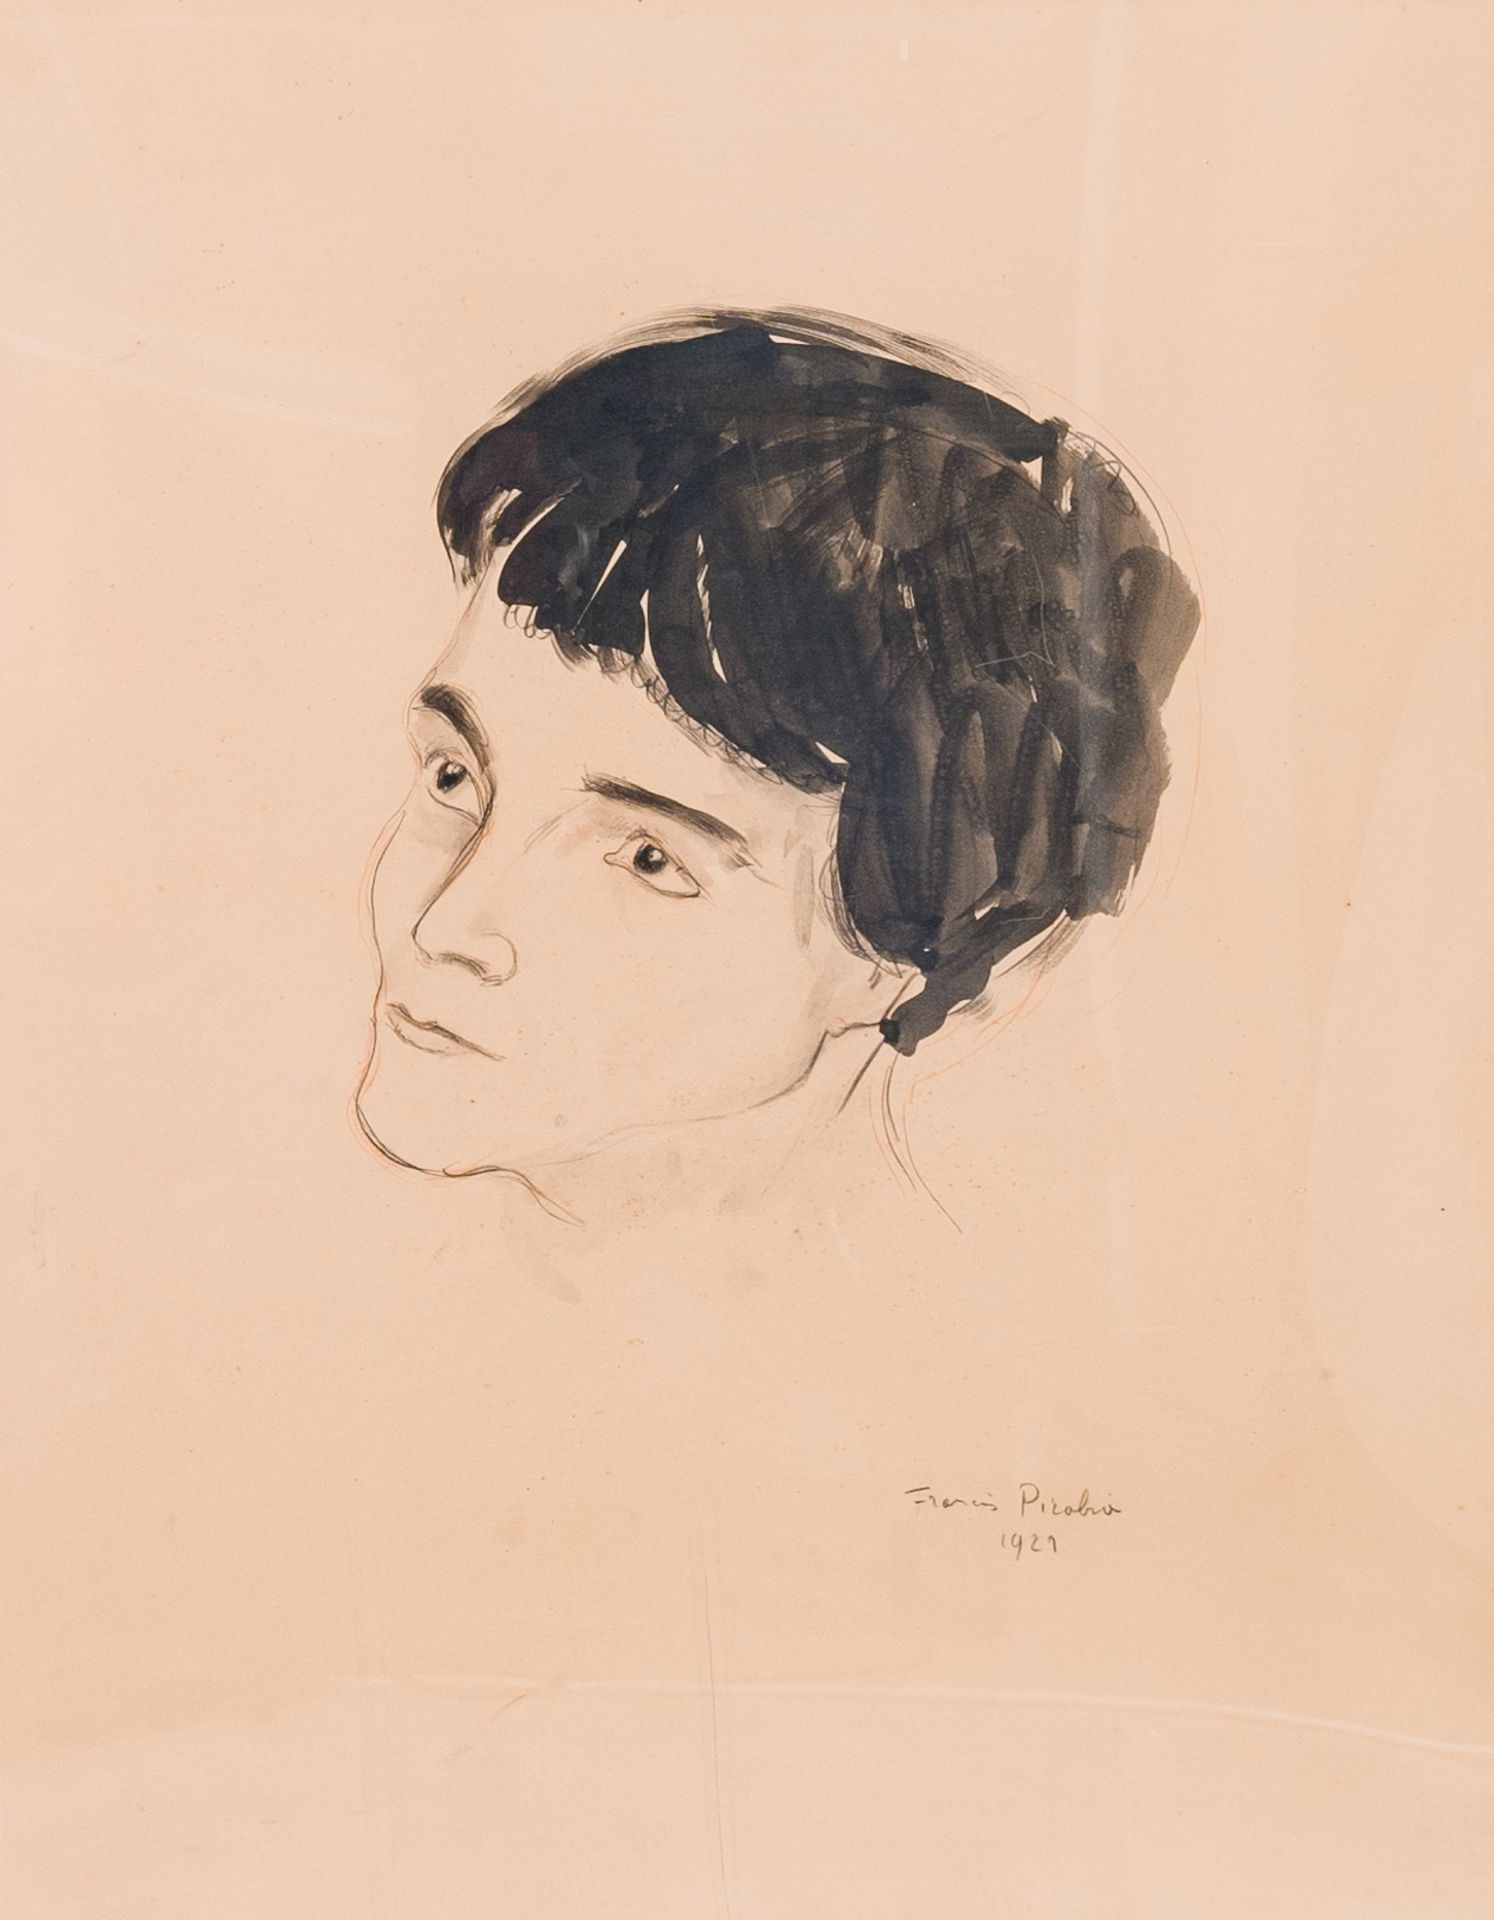 Francis Picabia (1879-1953): 'Head of a young woman', pencil and watercolor drawing, dated 1921 - Image 8 of 14